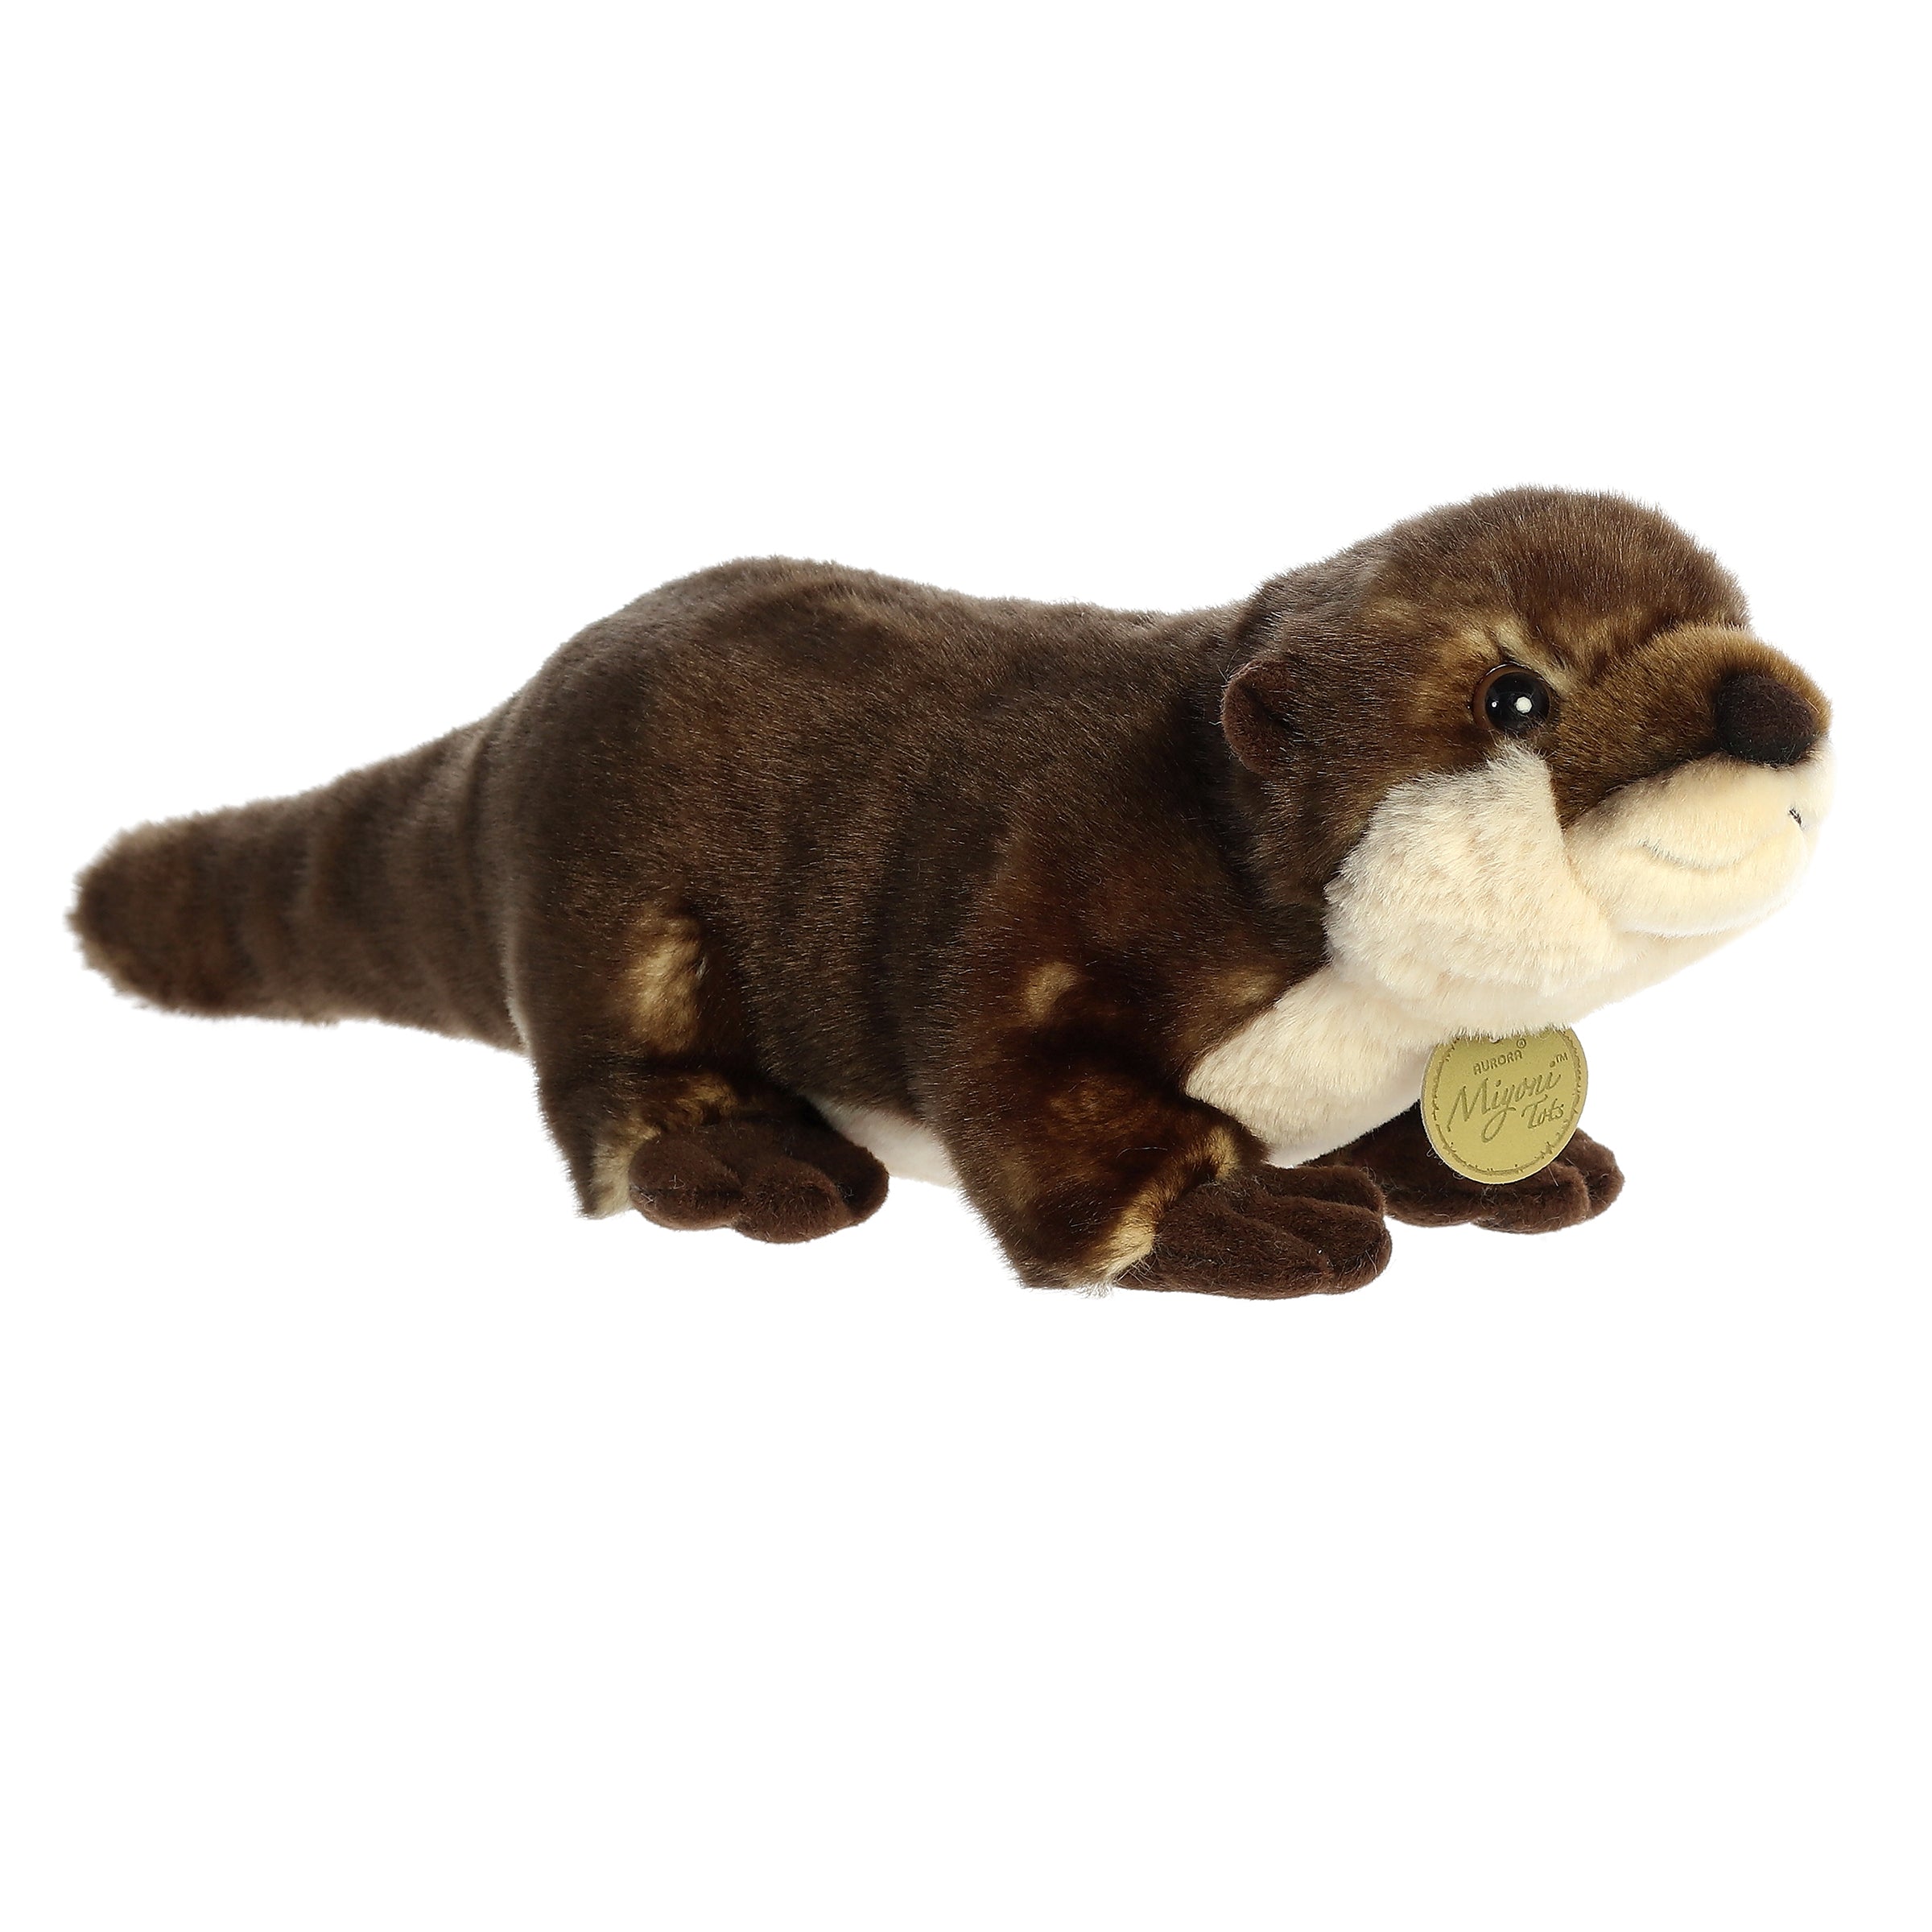 River Otter Pup plush with a soft, chocolate brown coat and a sweet, cashew-colored tummy, and a unique hang tag on its neck.